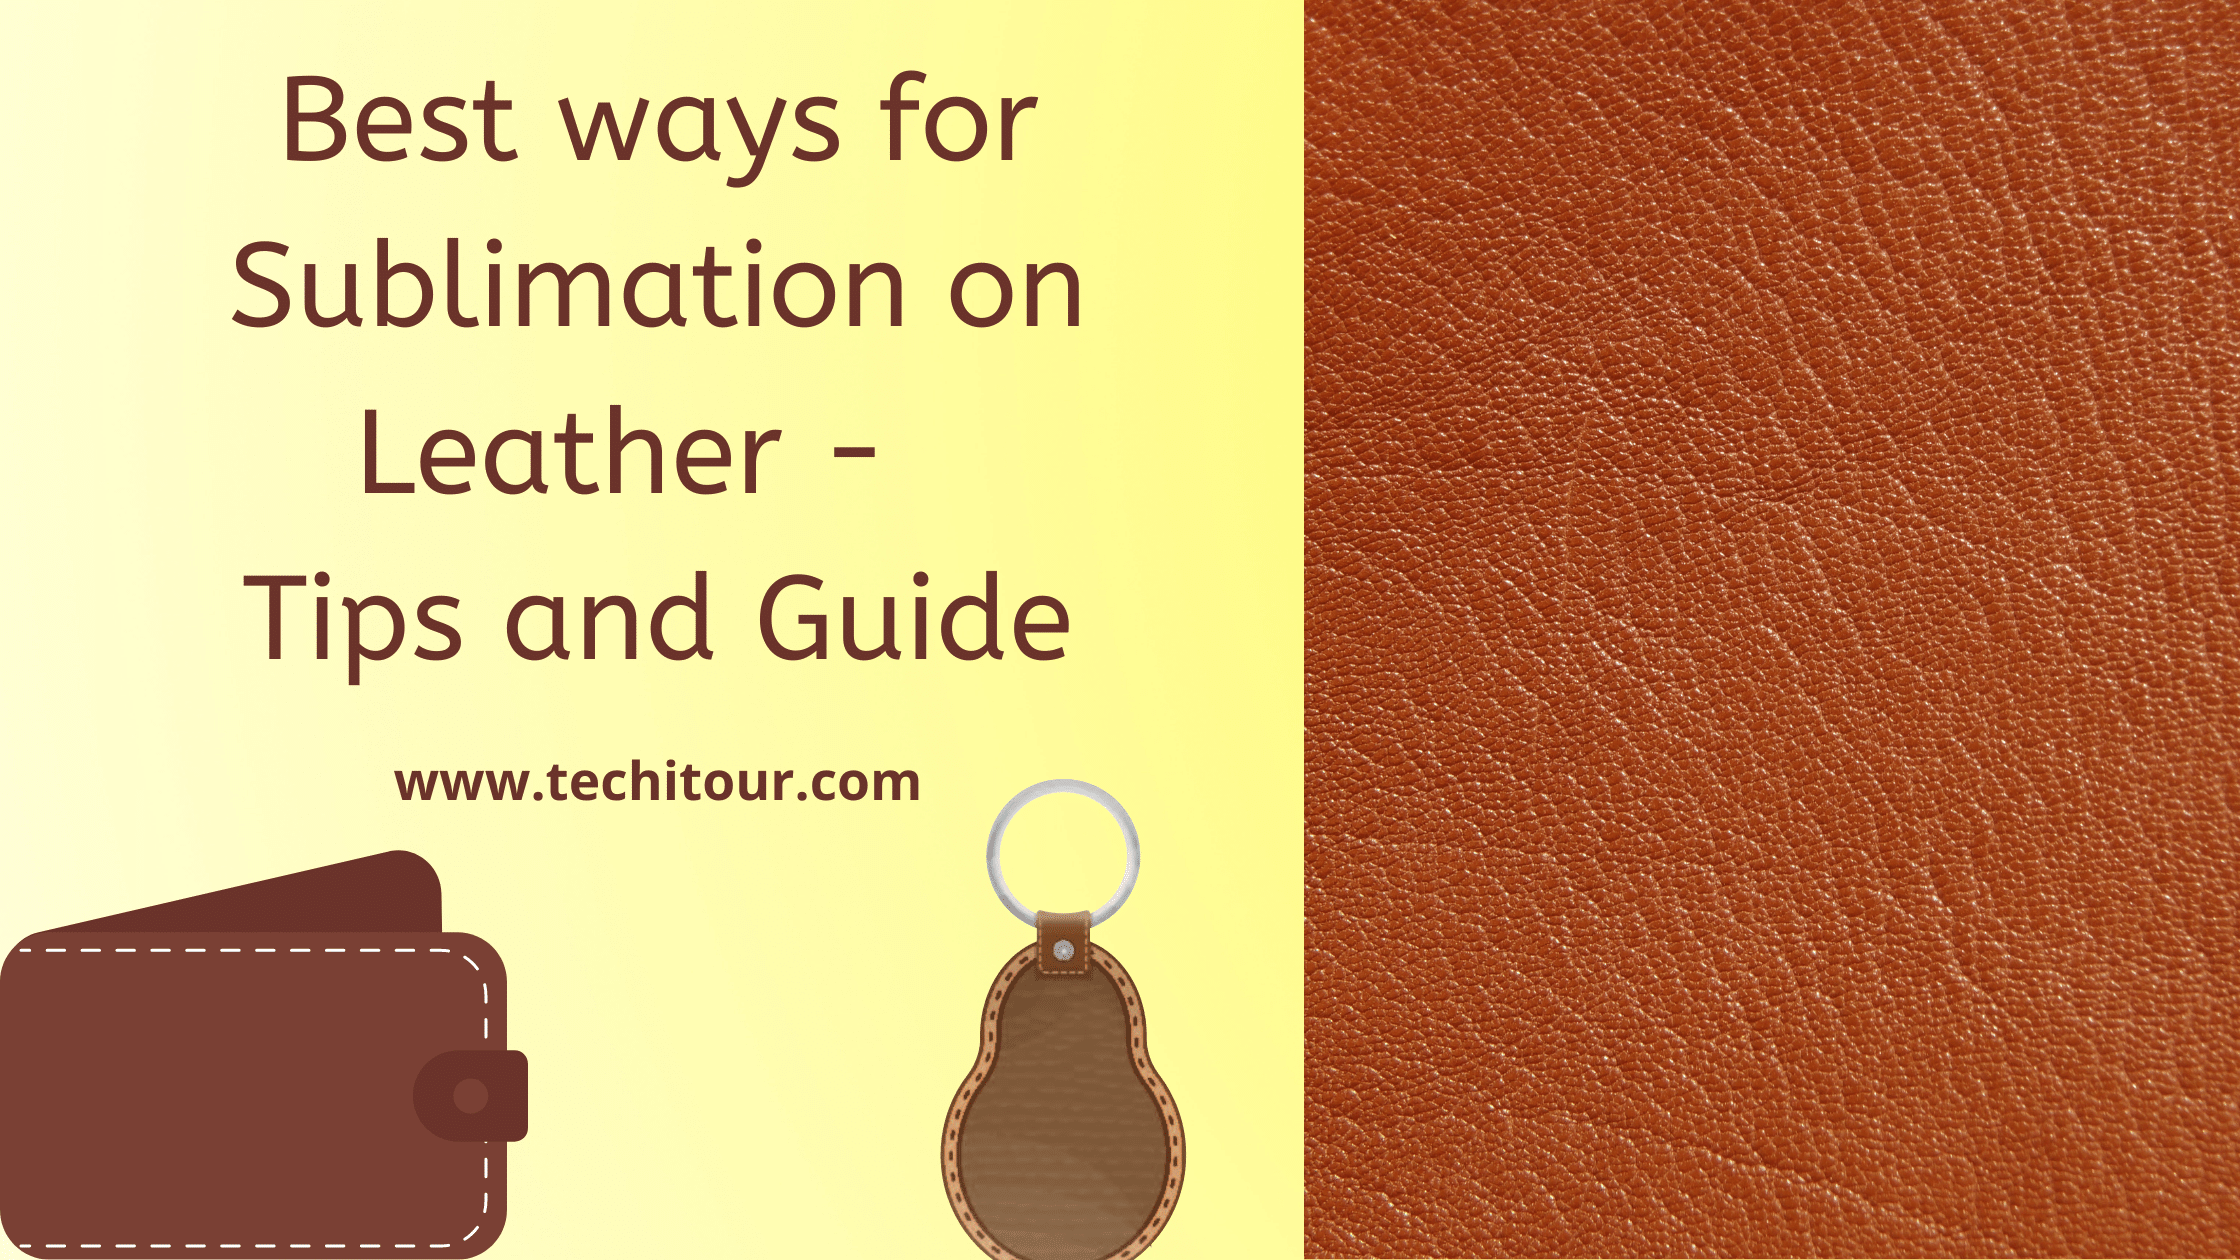 Best ways for Sublimation on Leather